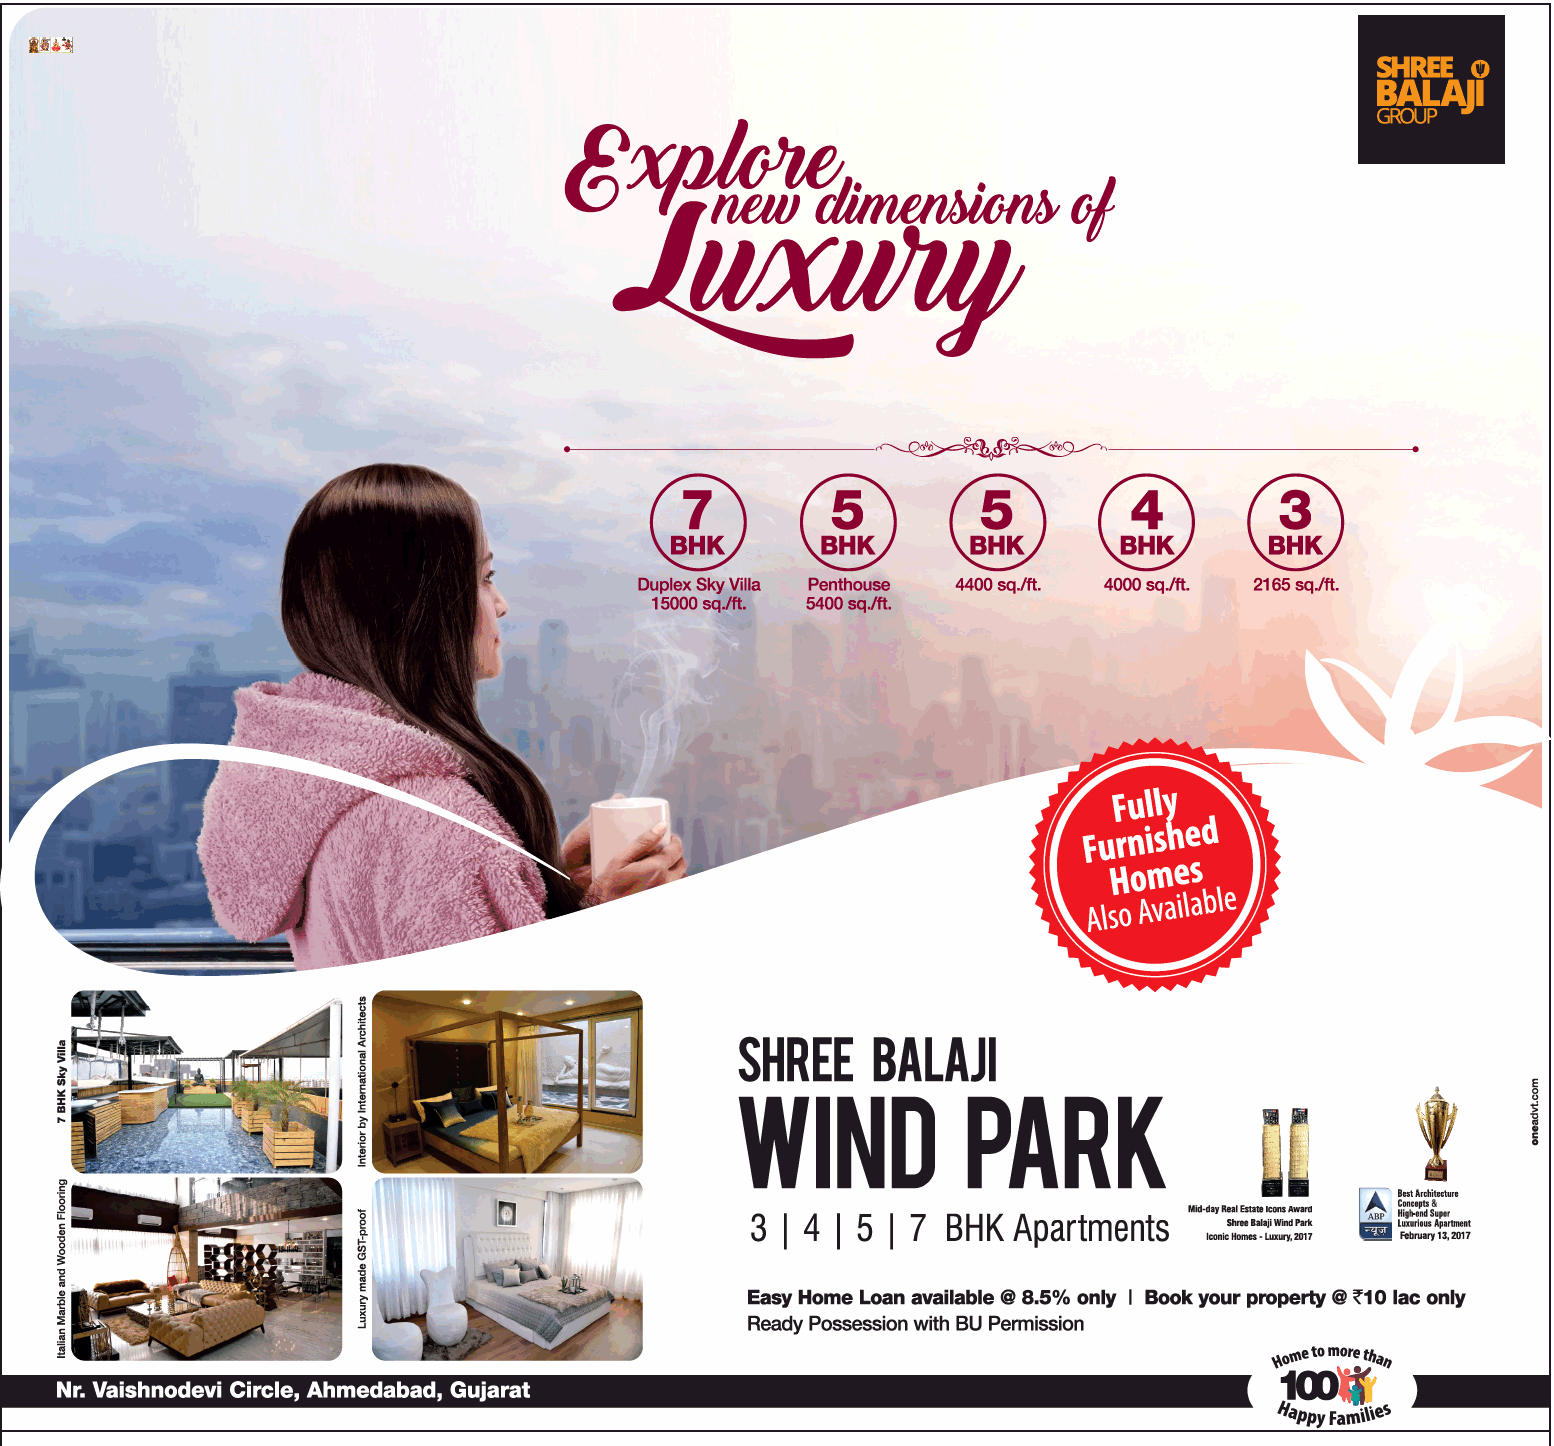 Fully furnished homes also available at Shree Balaji Wind Park in Ahmedabad Update